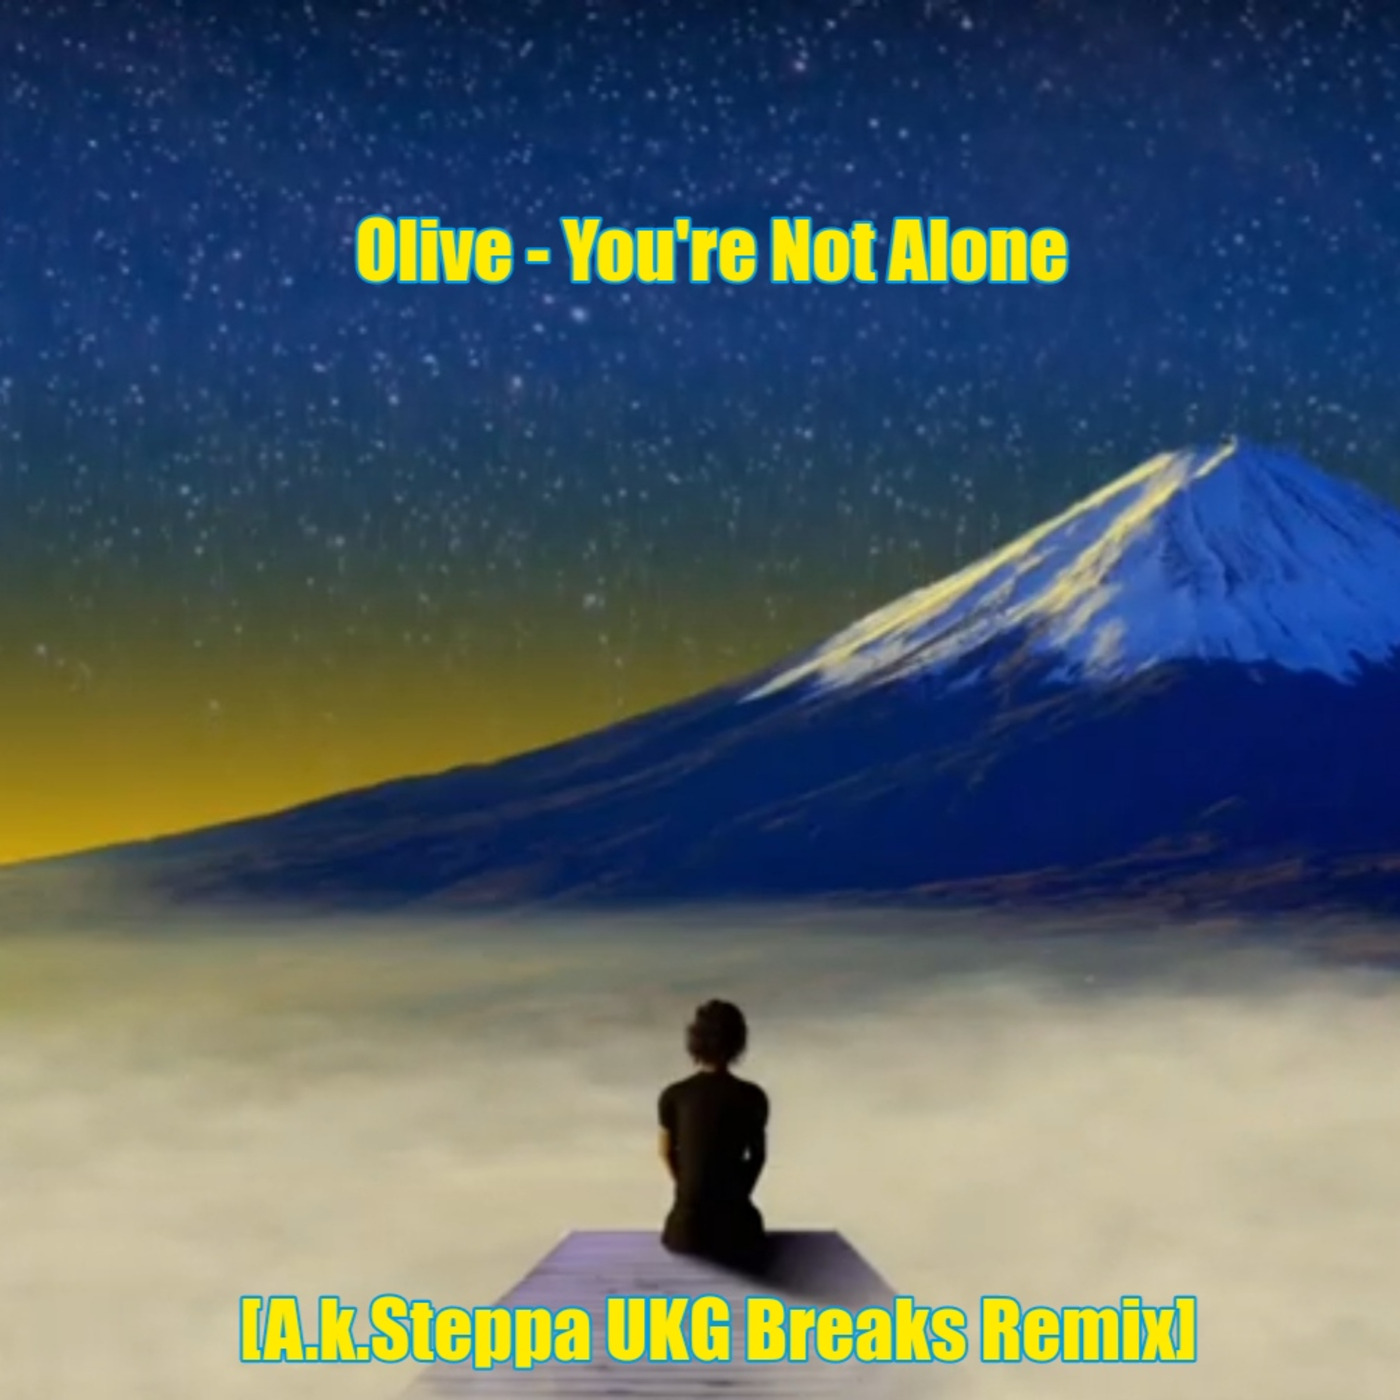 Episode 51: Olive - You’re Not Alone [A.k.Steppa UKG Breaks Remix]